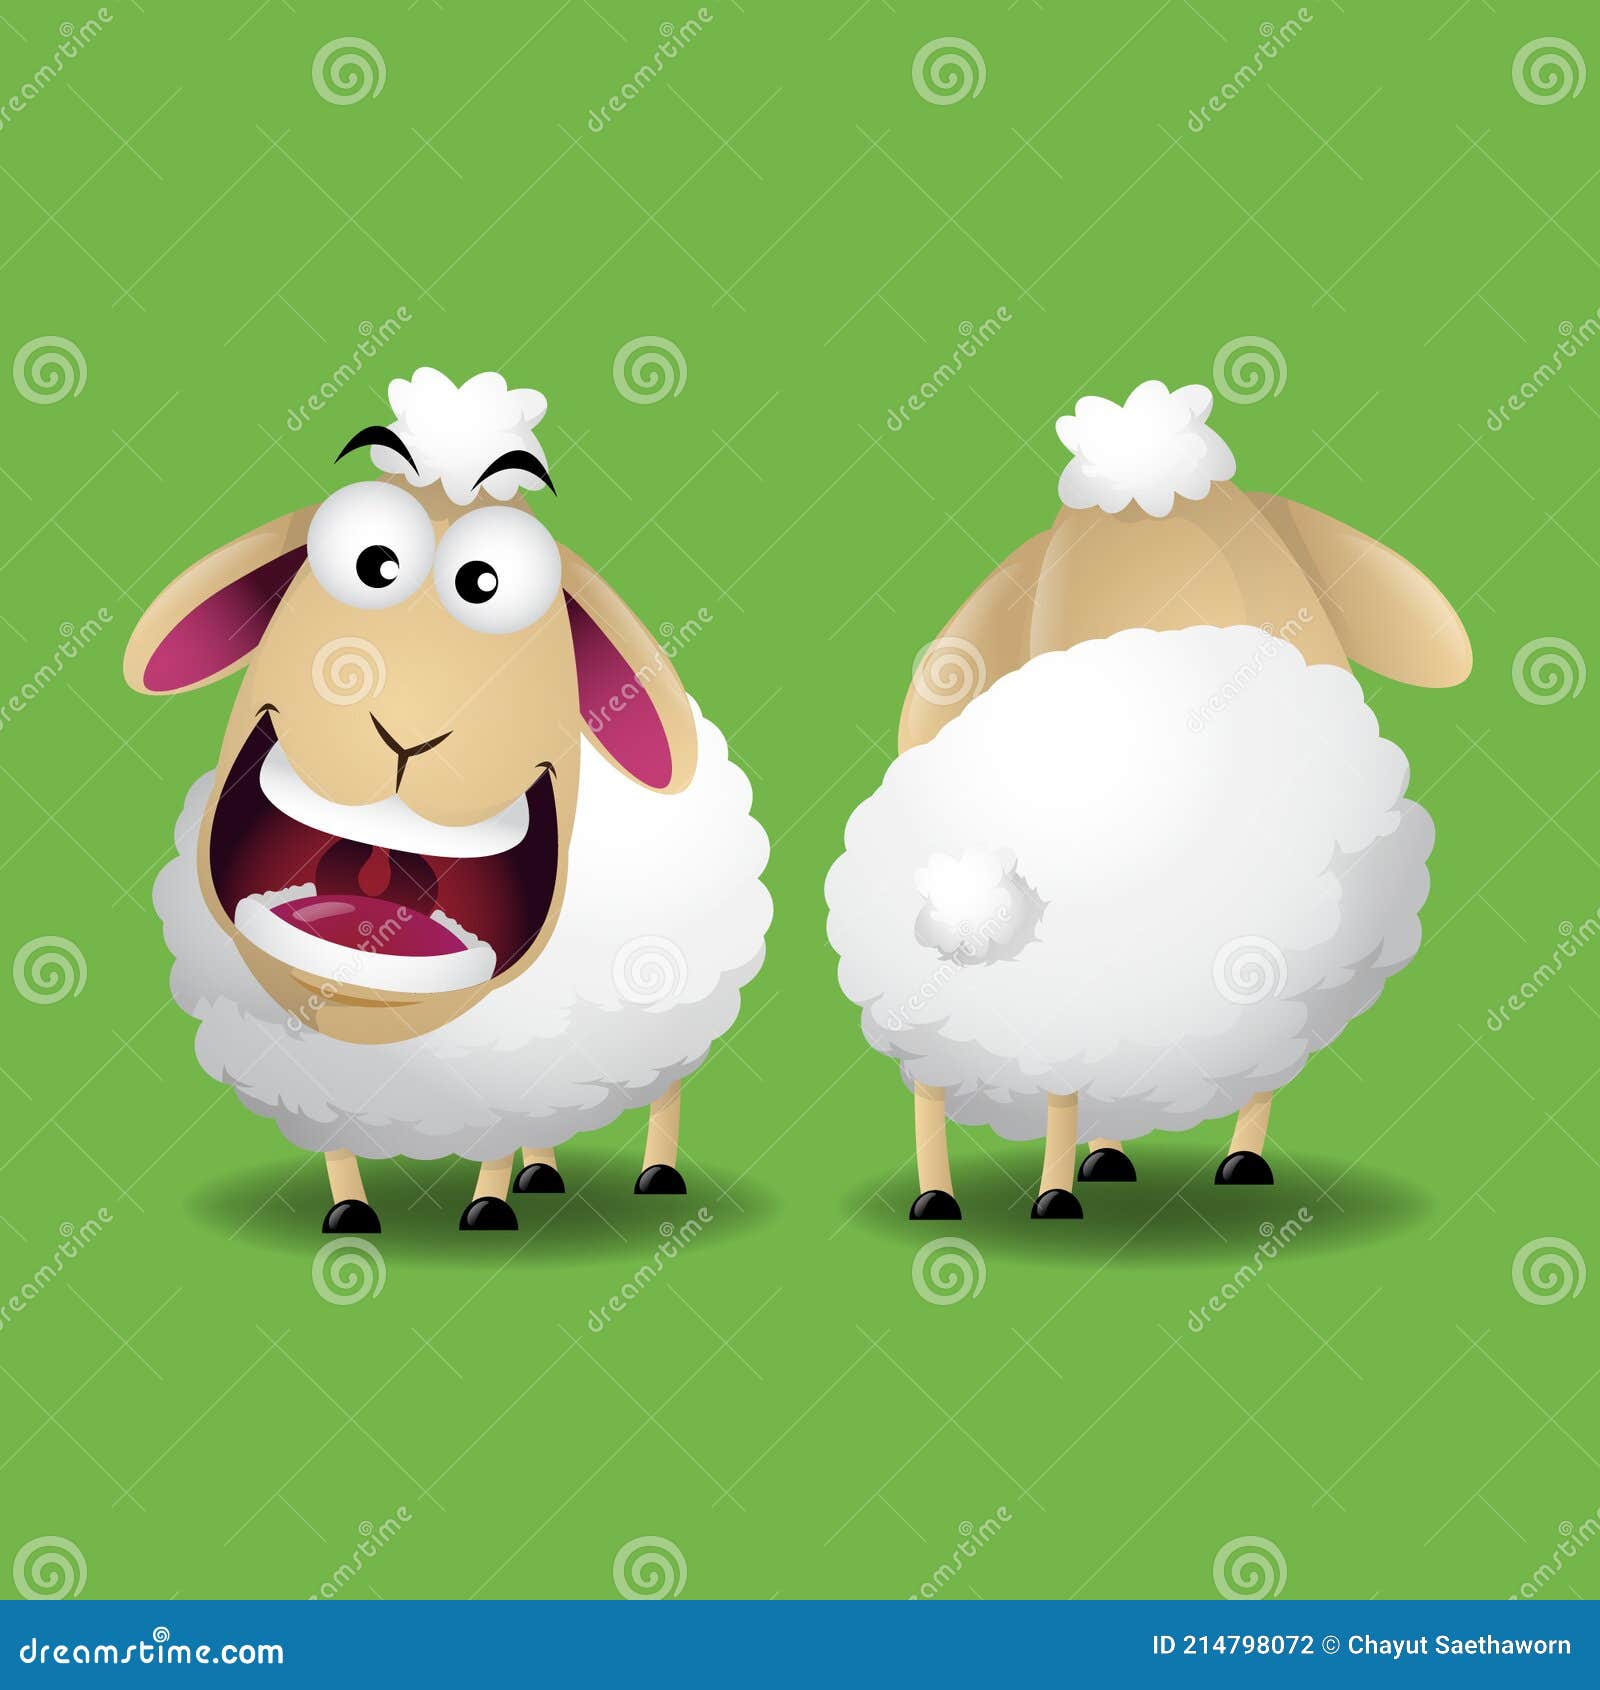 Funny Sheep Character Design Front and Back Side. Stock Vector ...